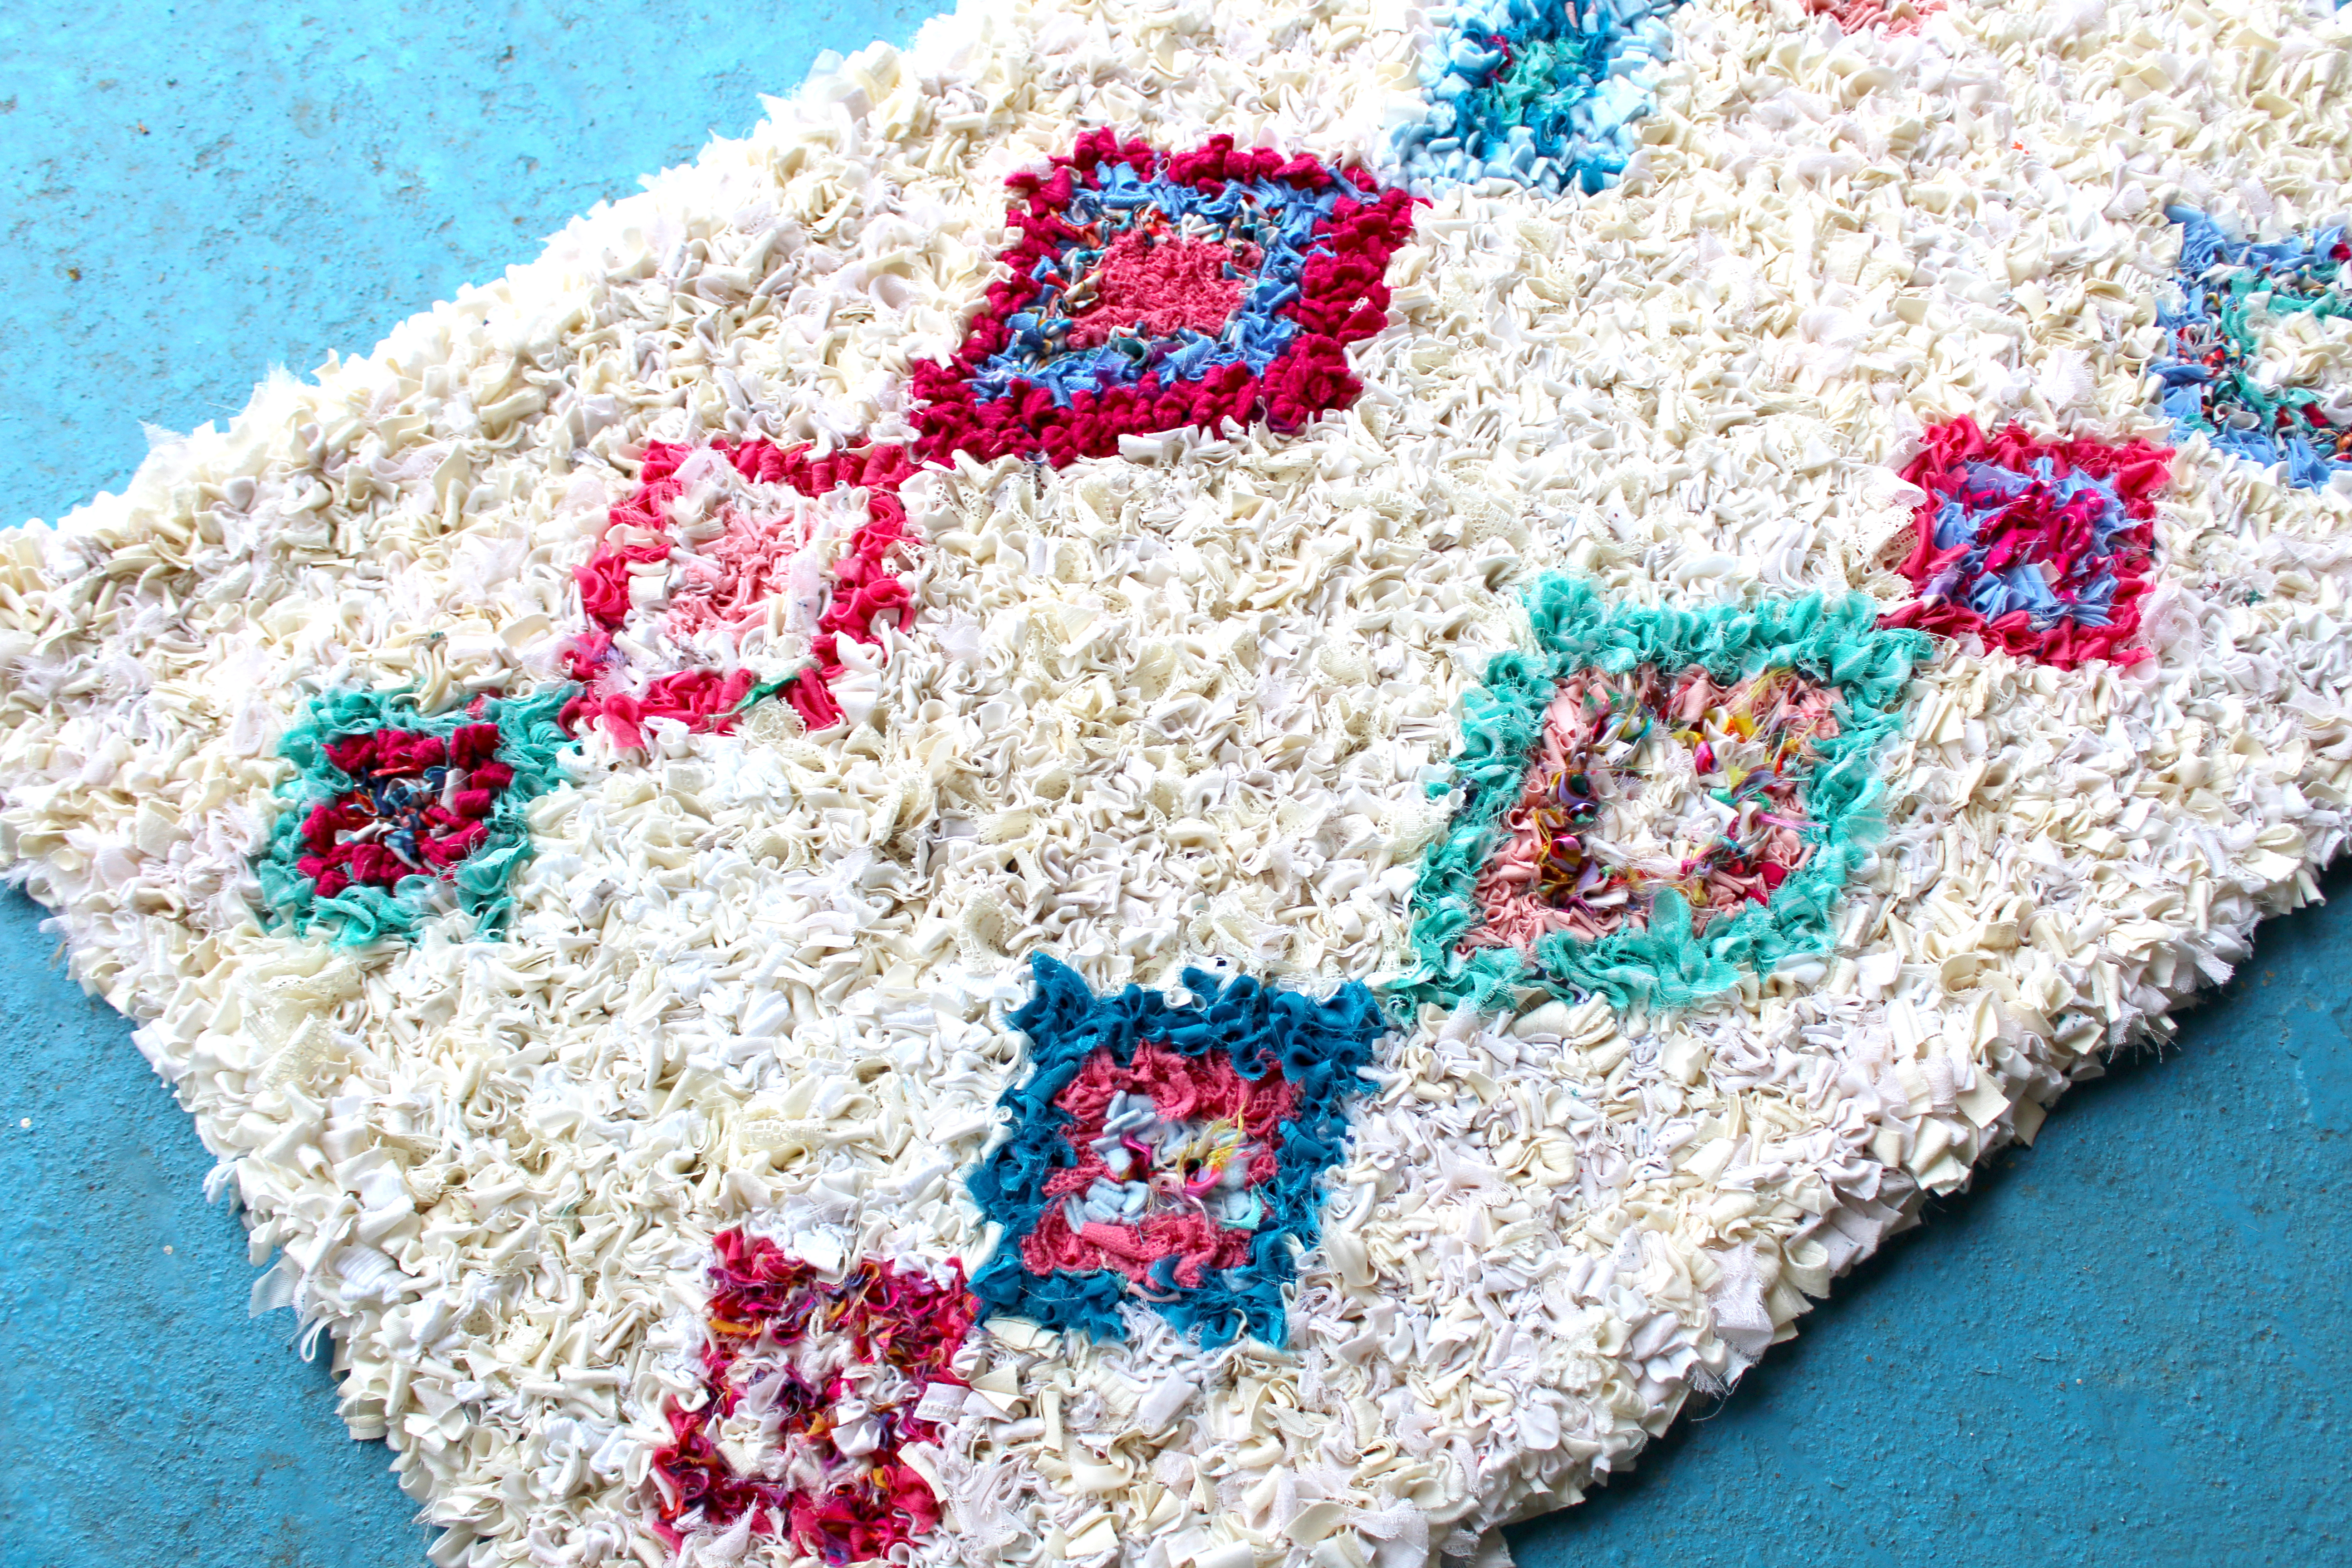 Colourful rag rug with cream background made by Elspeth Jackson for Issue 103 of Mollie Makes